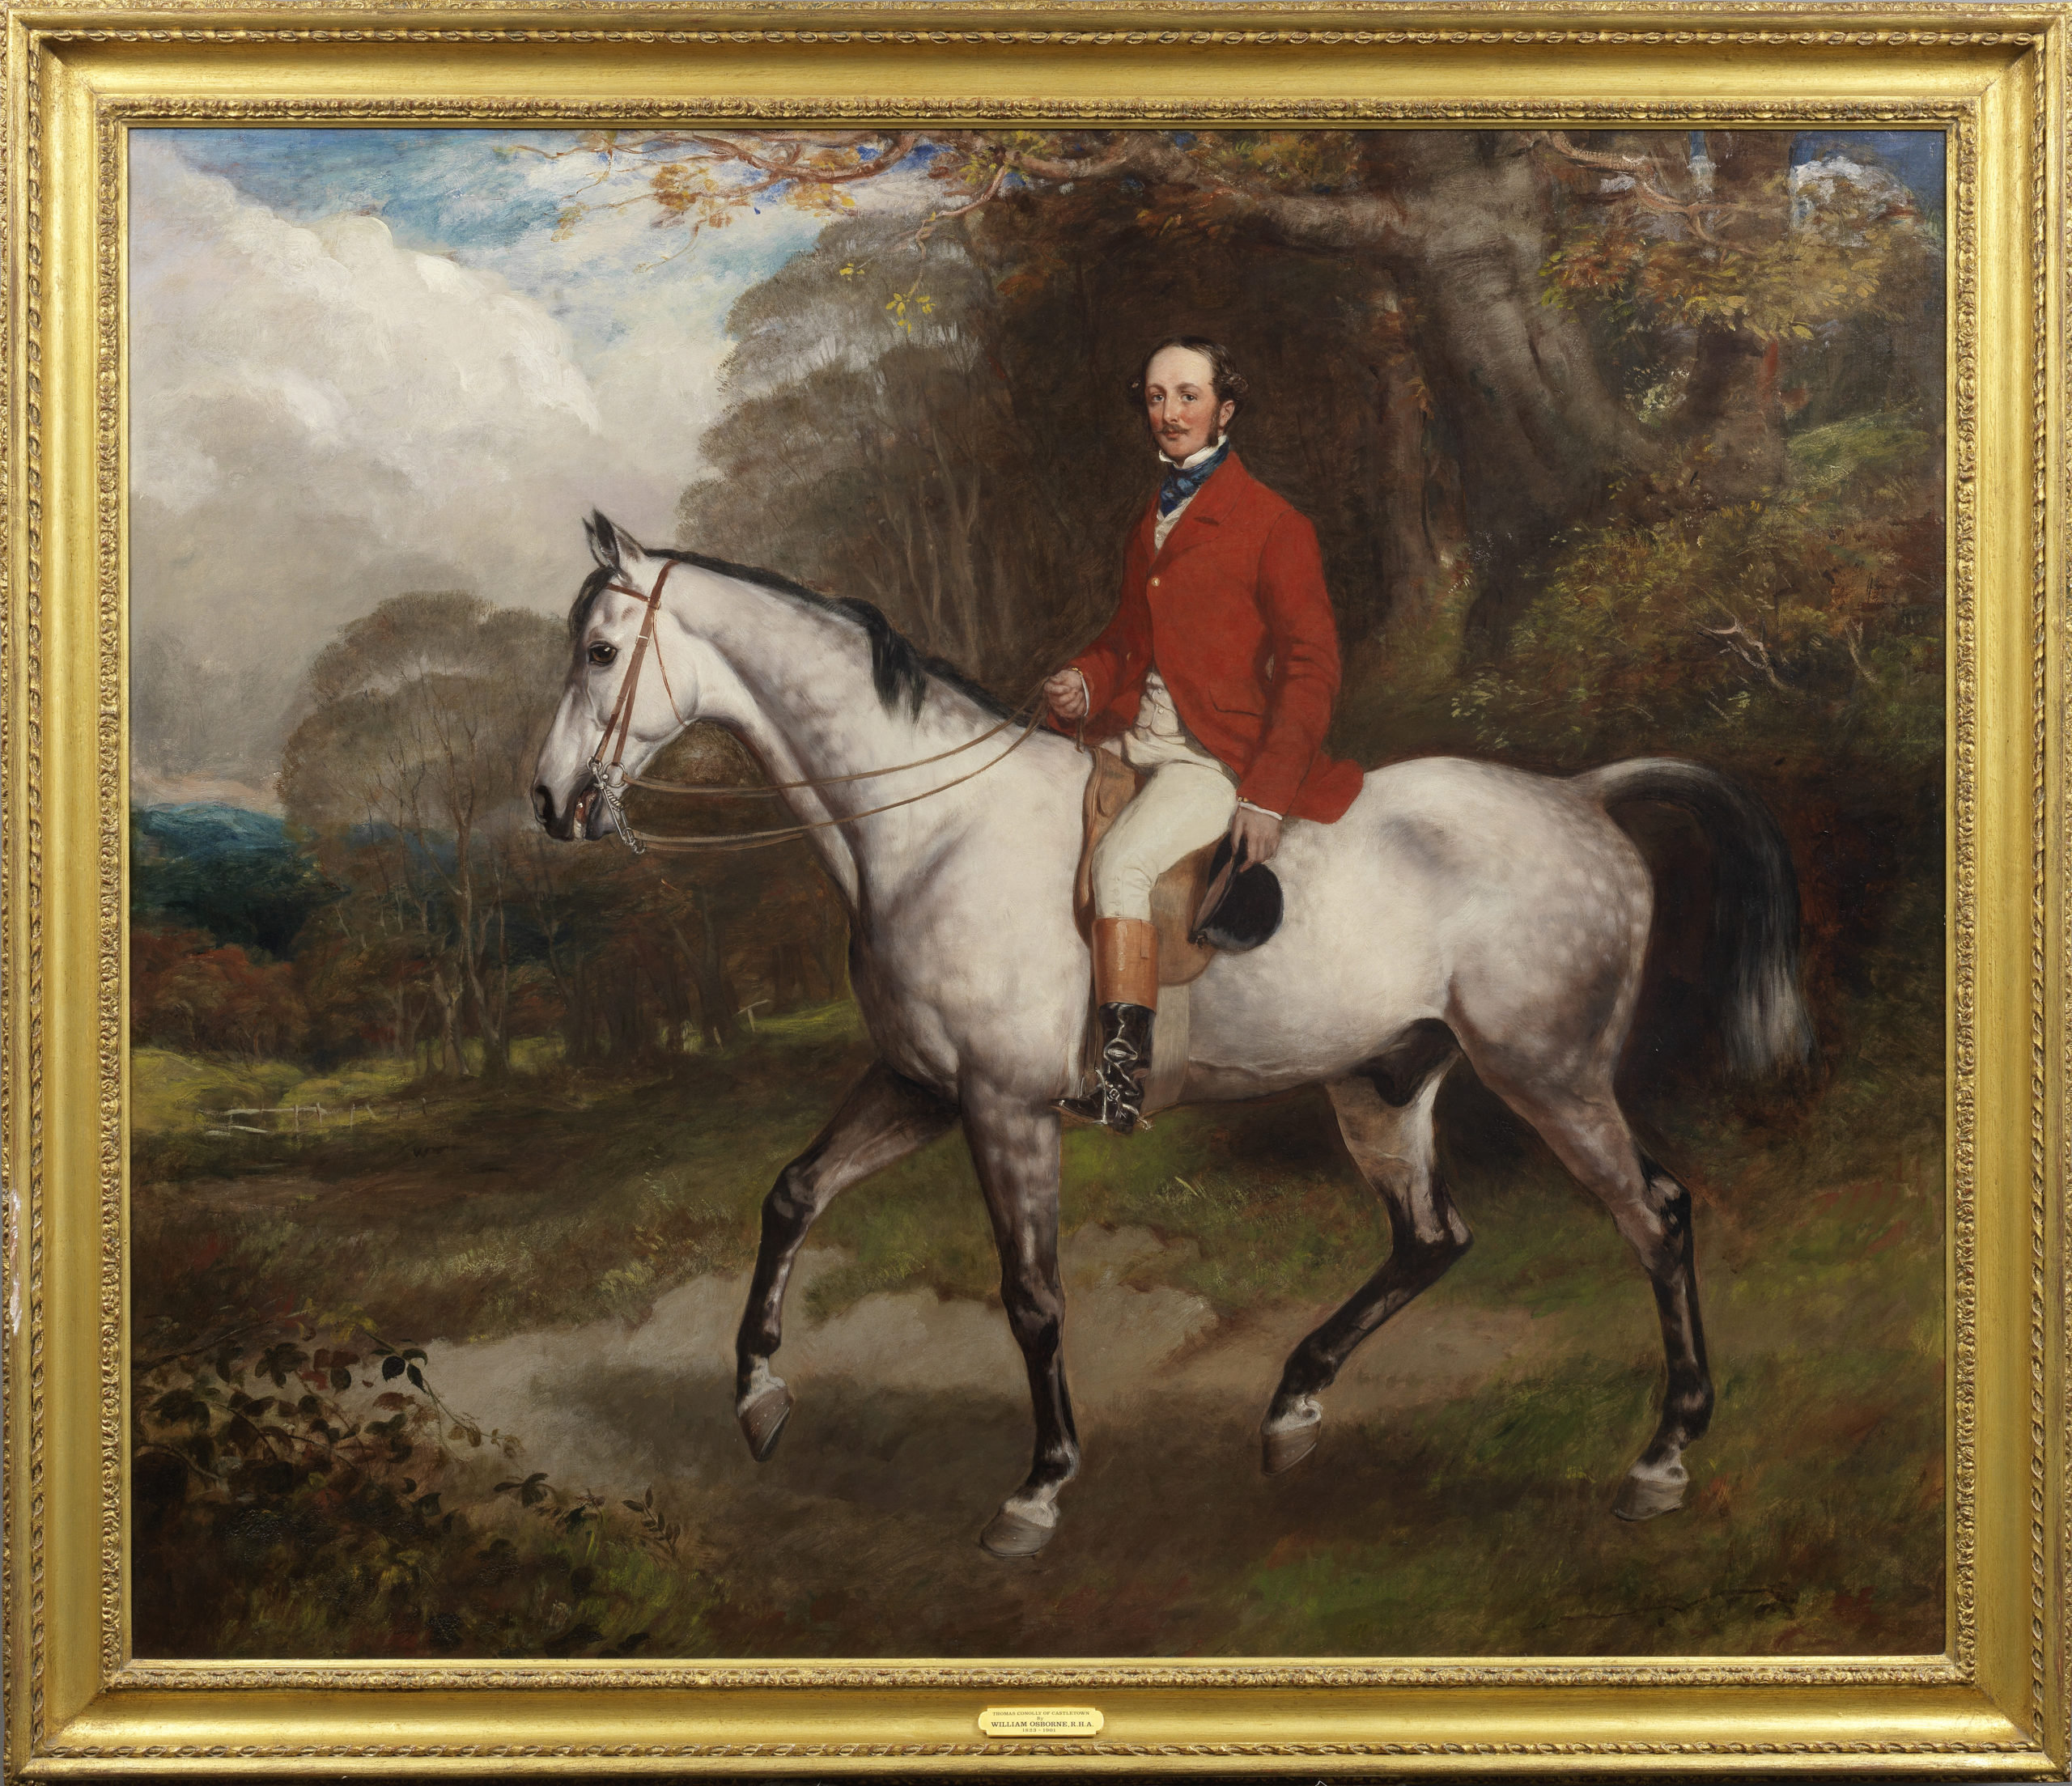 Equestrian portrait of Thomas Conolly, MP, of Castletown, mounted on a dappled grey hunter in a wooded landscape